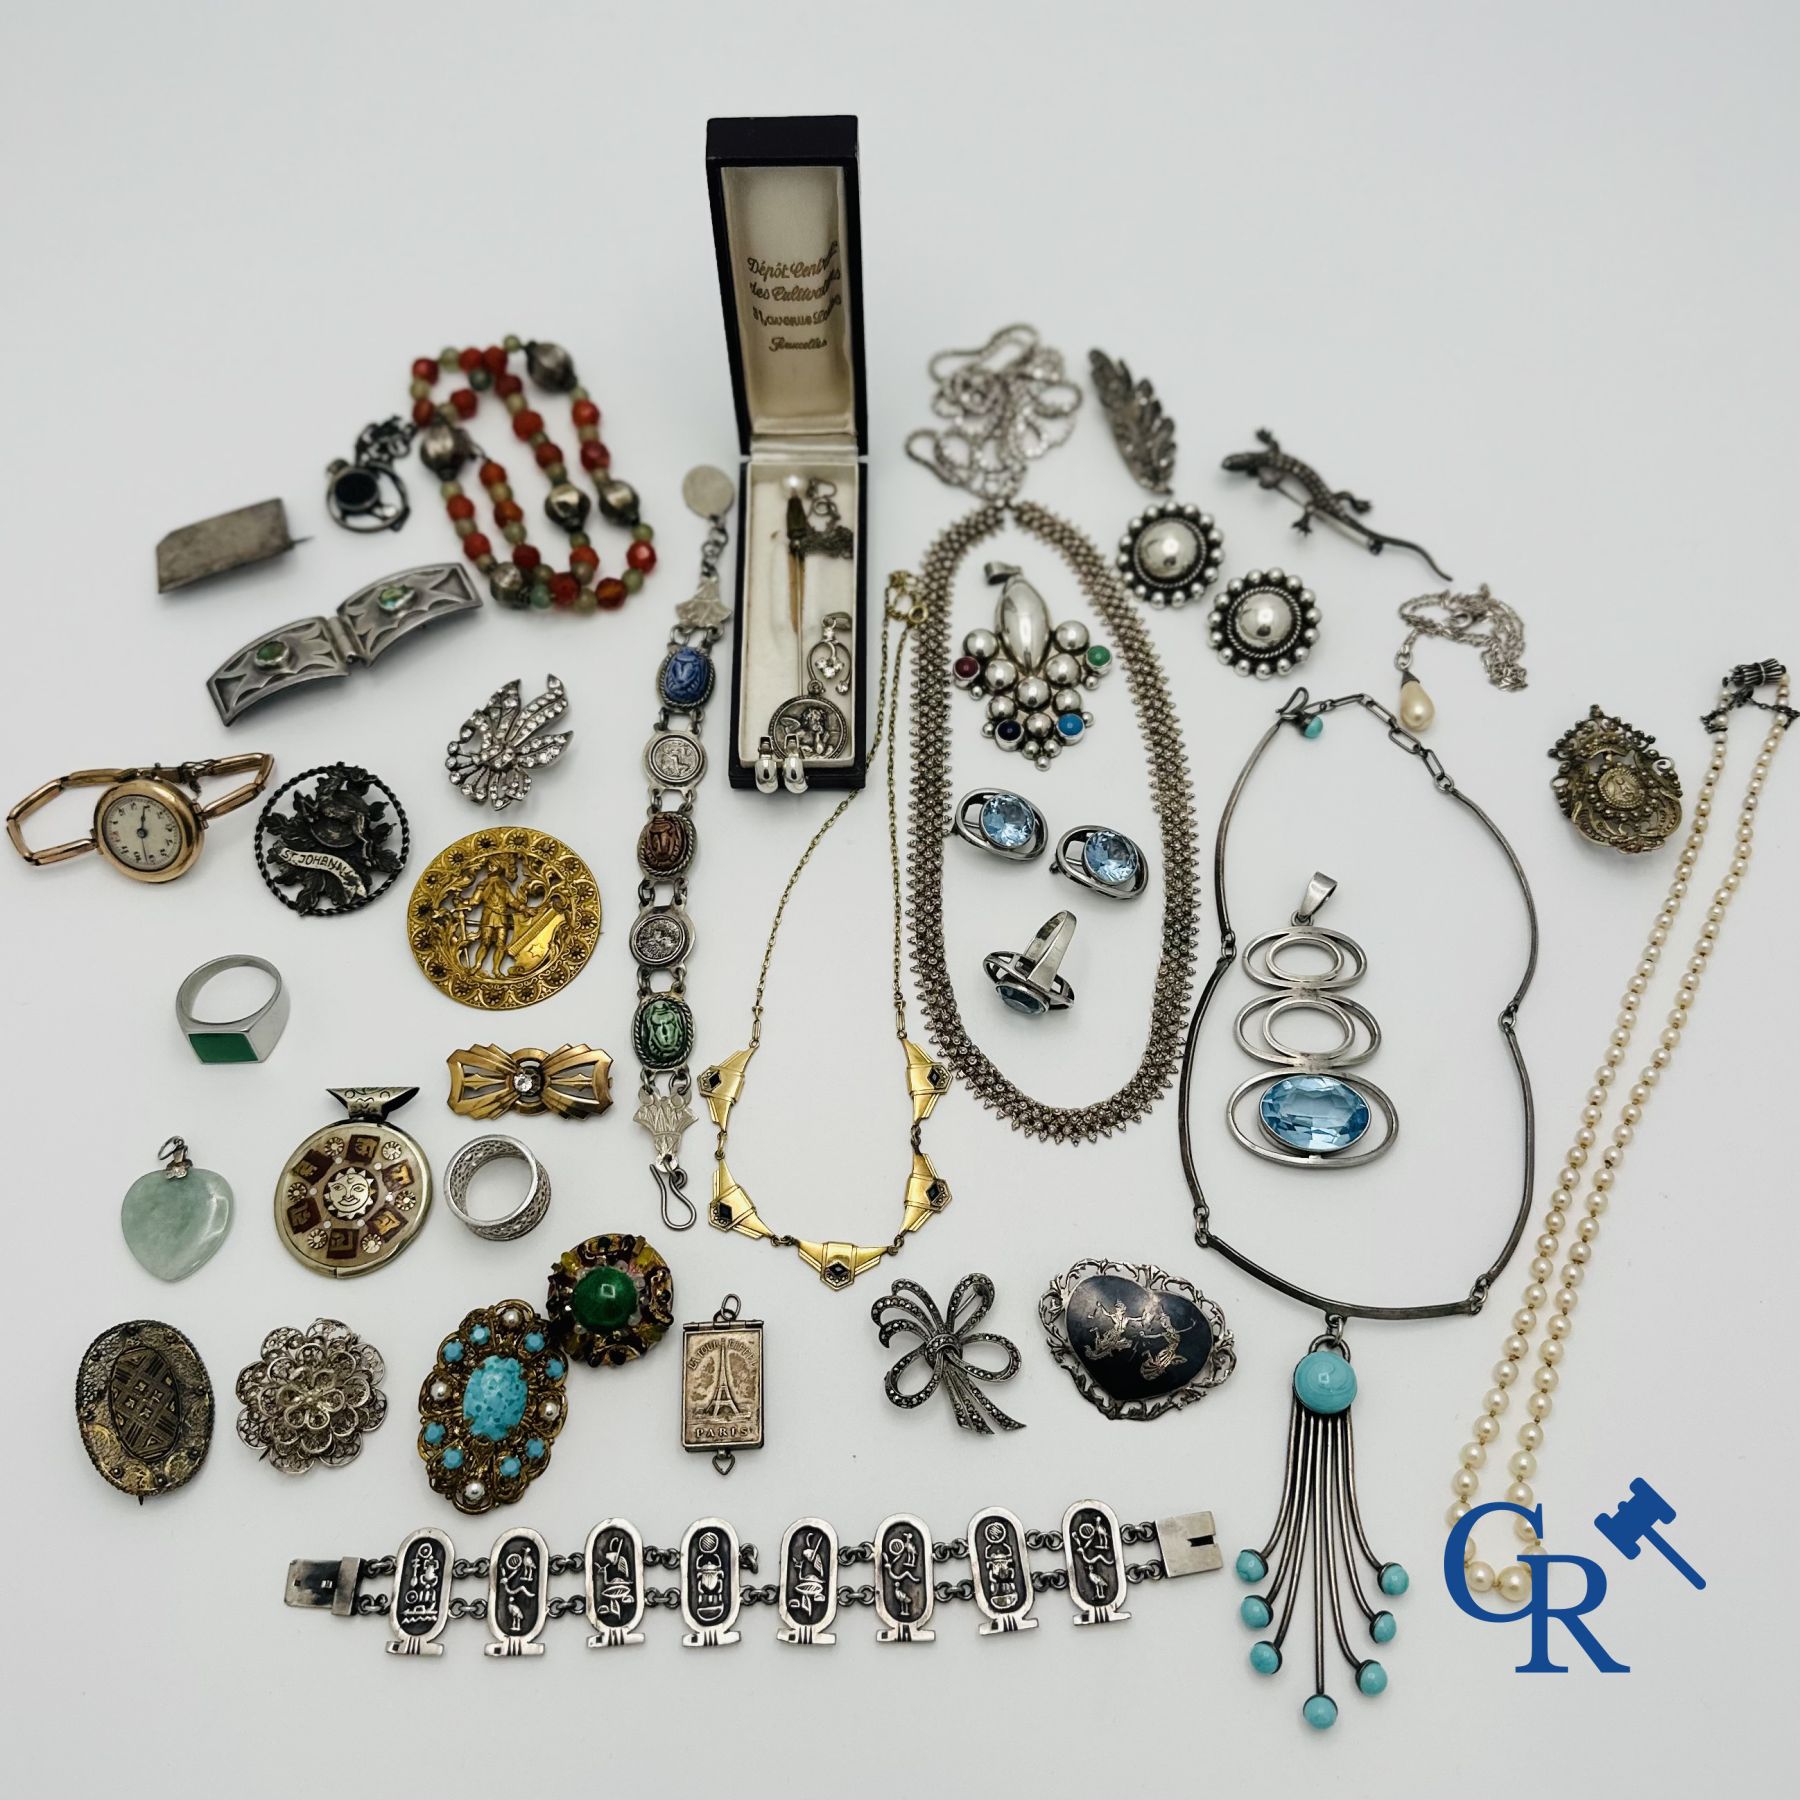 Jewellery-timepieces: Lot of fantasy jewellery and a ladies' timepiece.